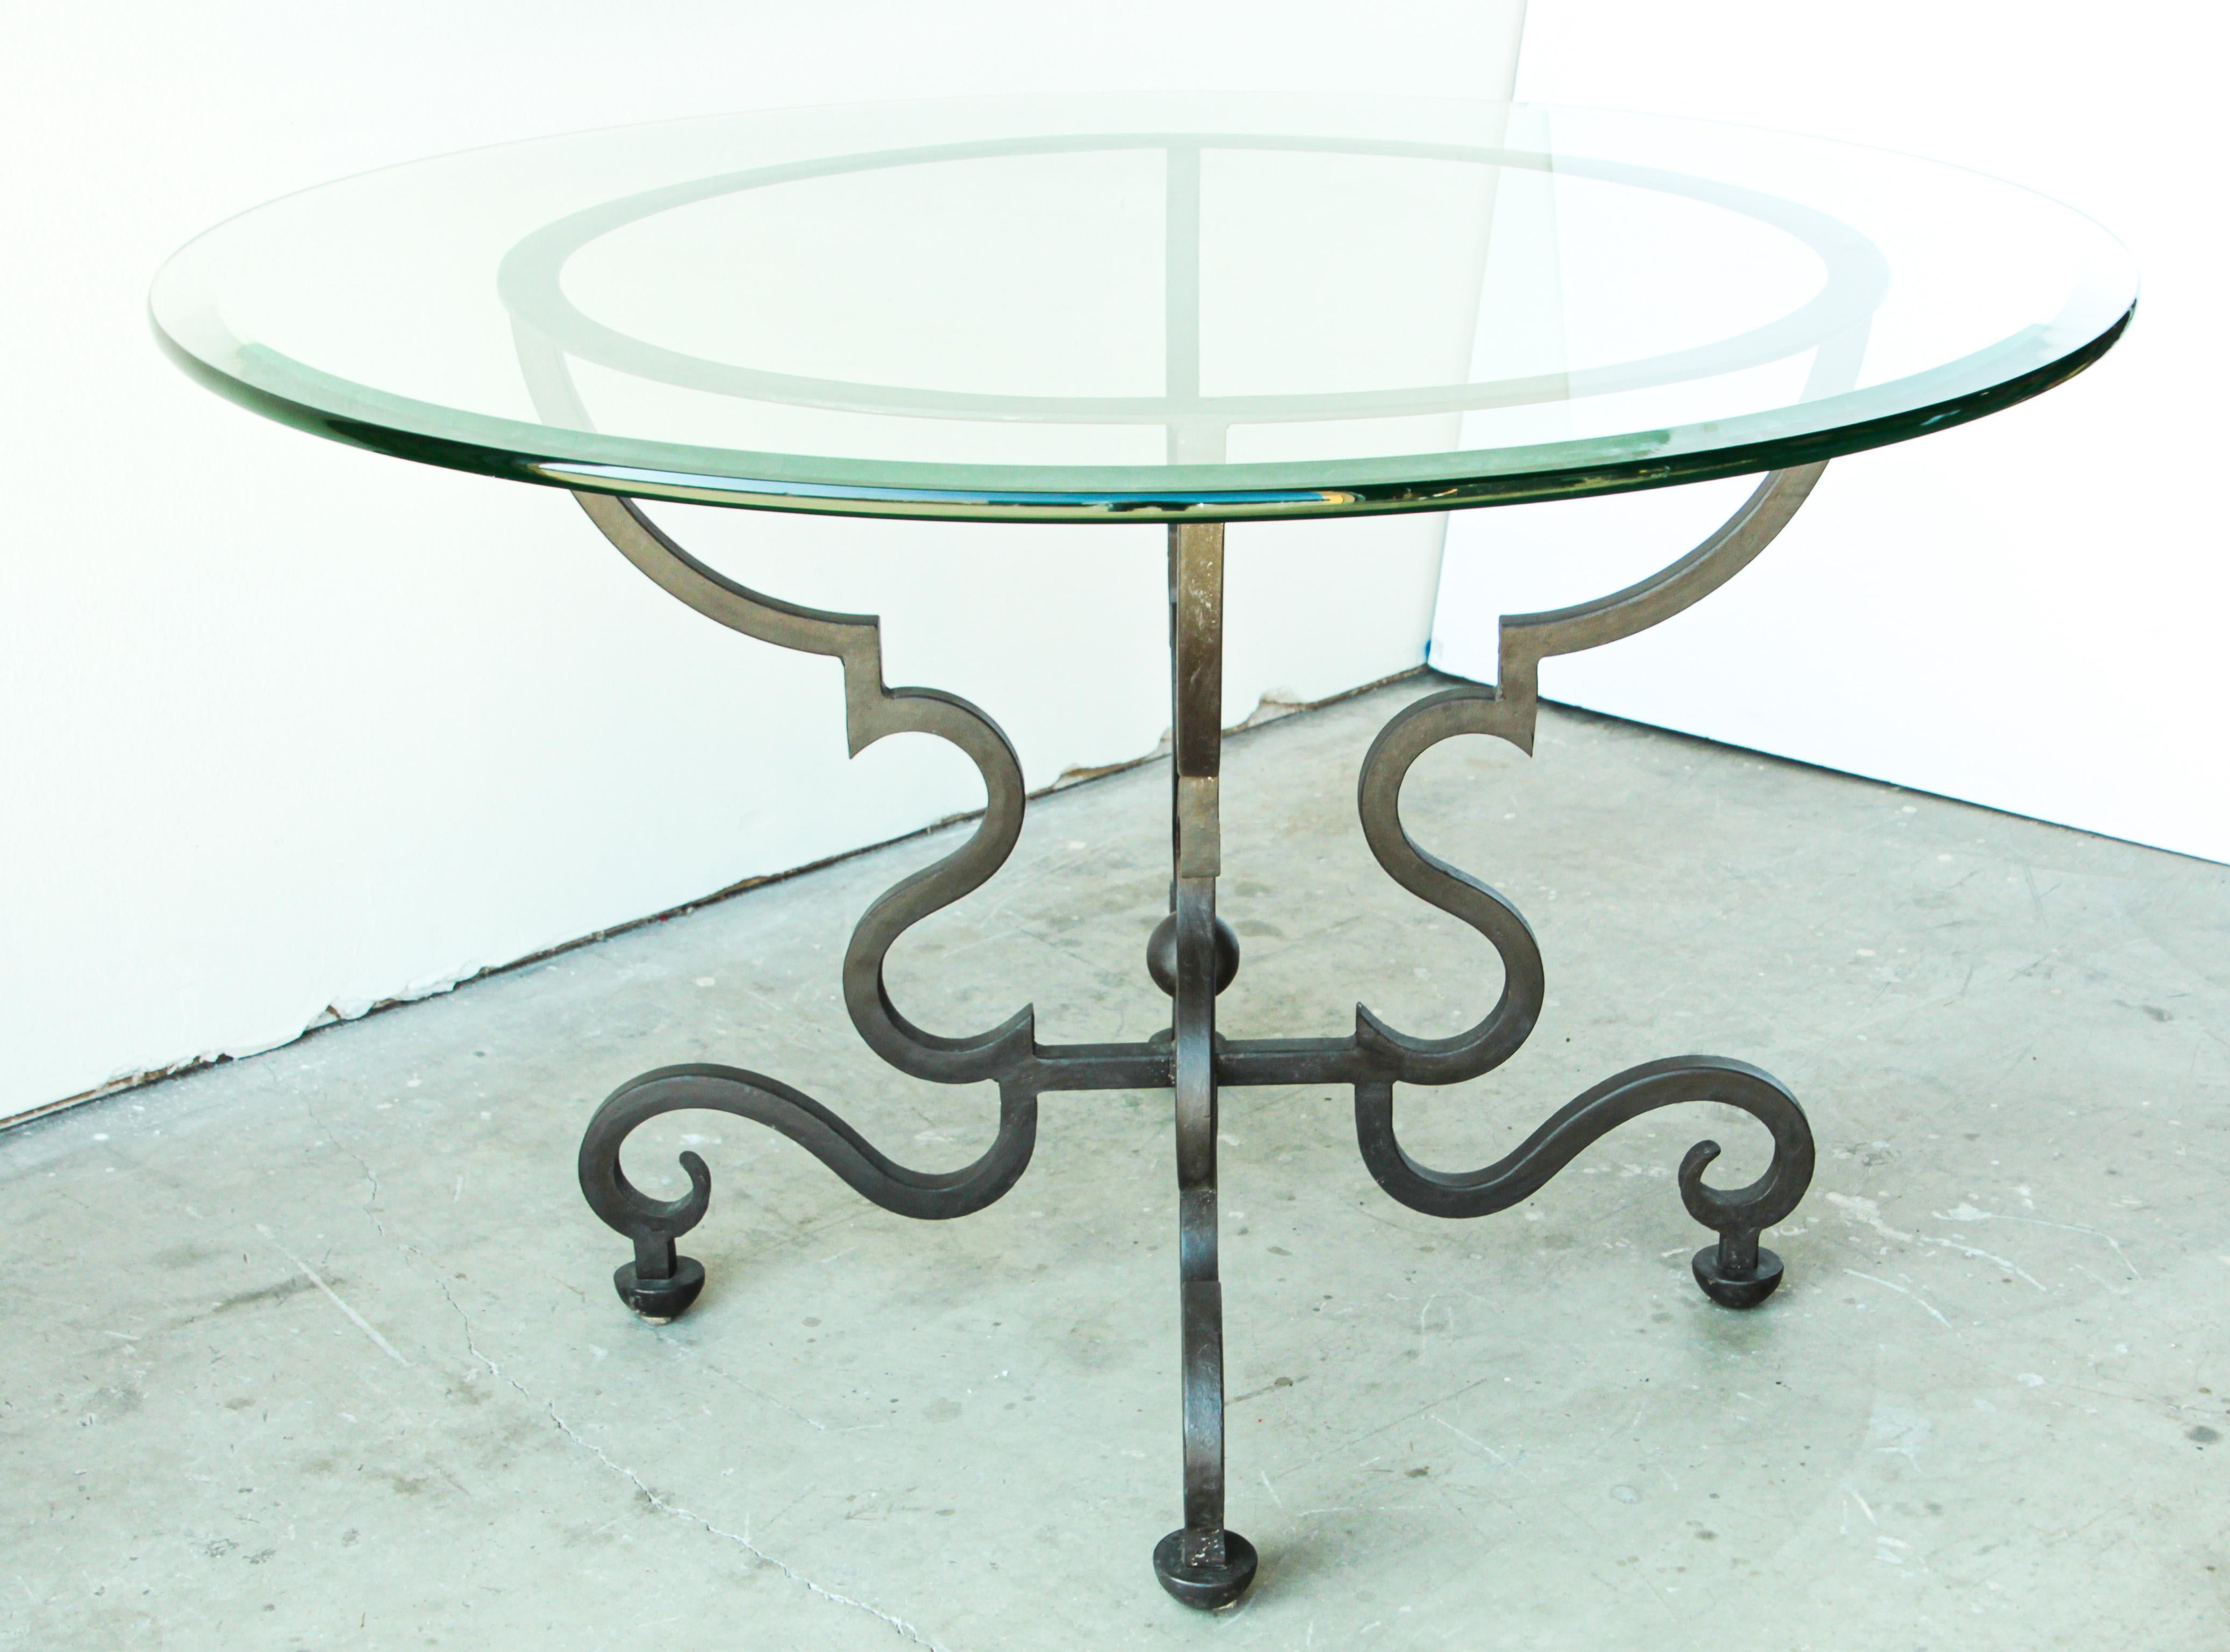 Impressive Spanish round dining table wrought iron base with heavy thick featuring decorative scrolled legs and feet. Heavy iron base with a patinated iron rust finish.
Great for any Spanish Moorish Mediterranean style garden.
Wrought iron dining